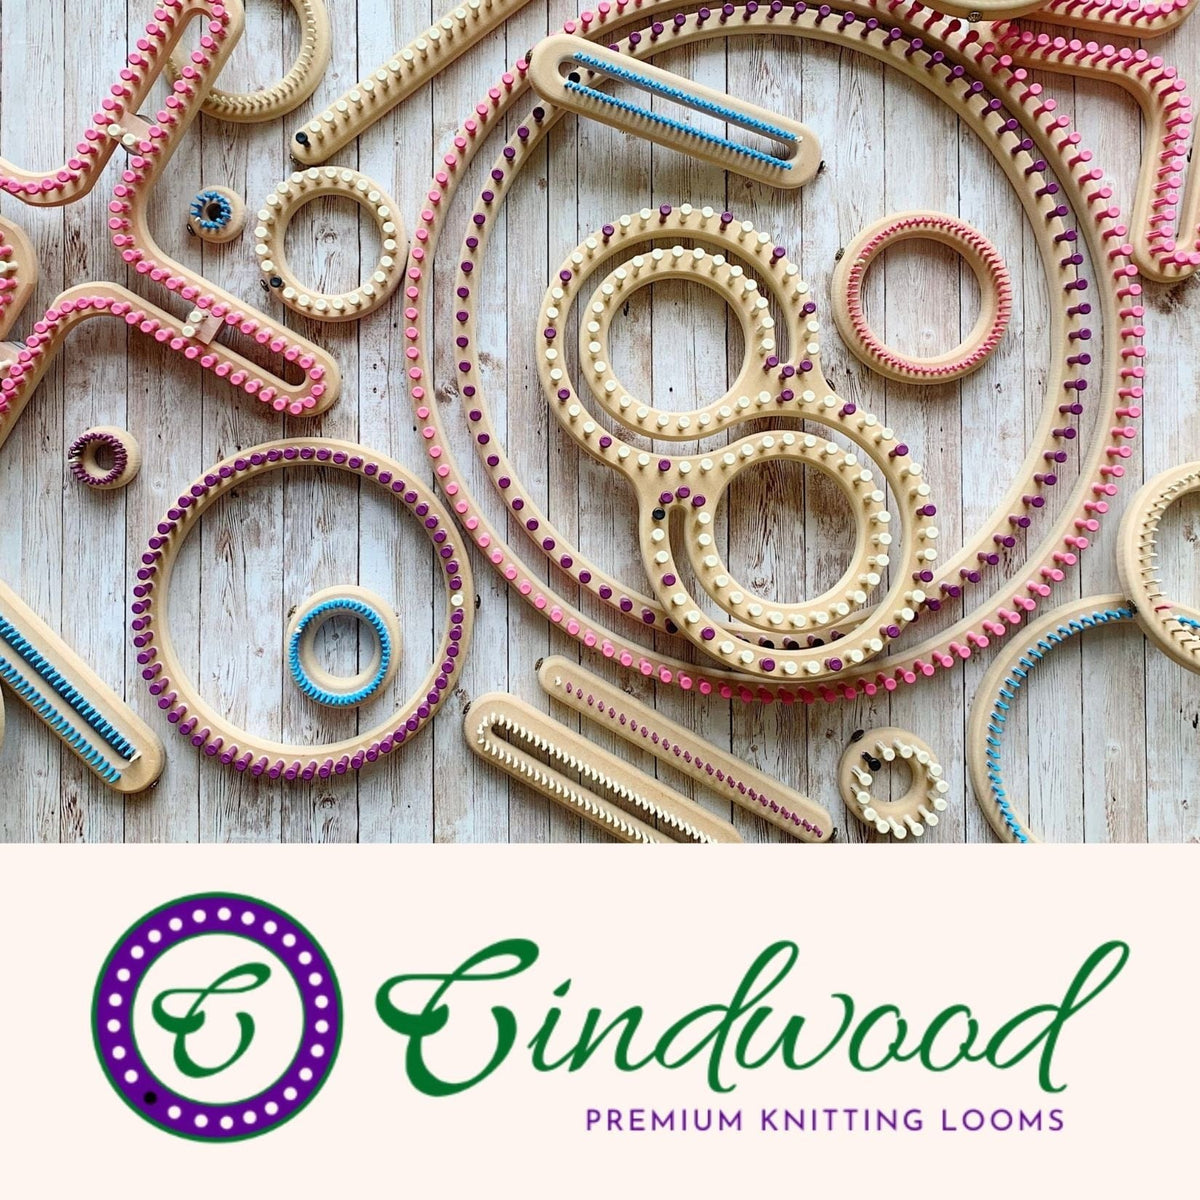 Cindwood Instruction Booklet (Ships free with each loom order